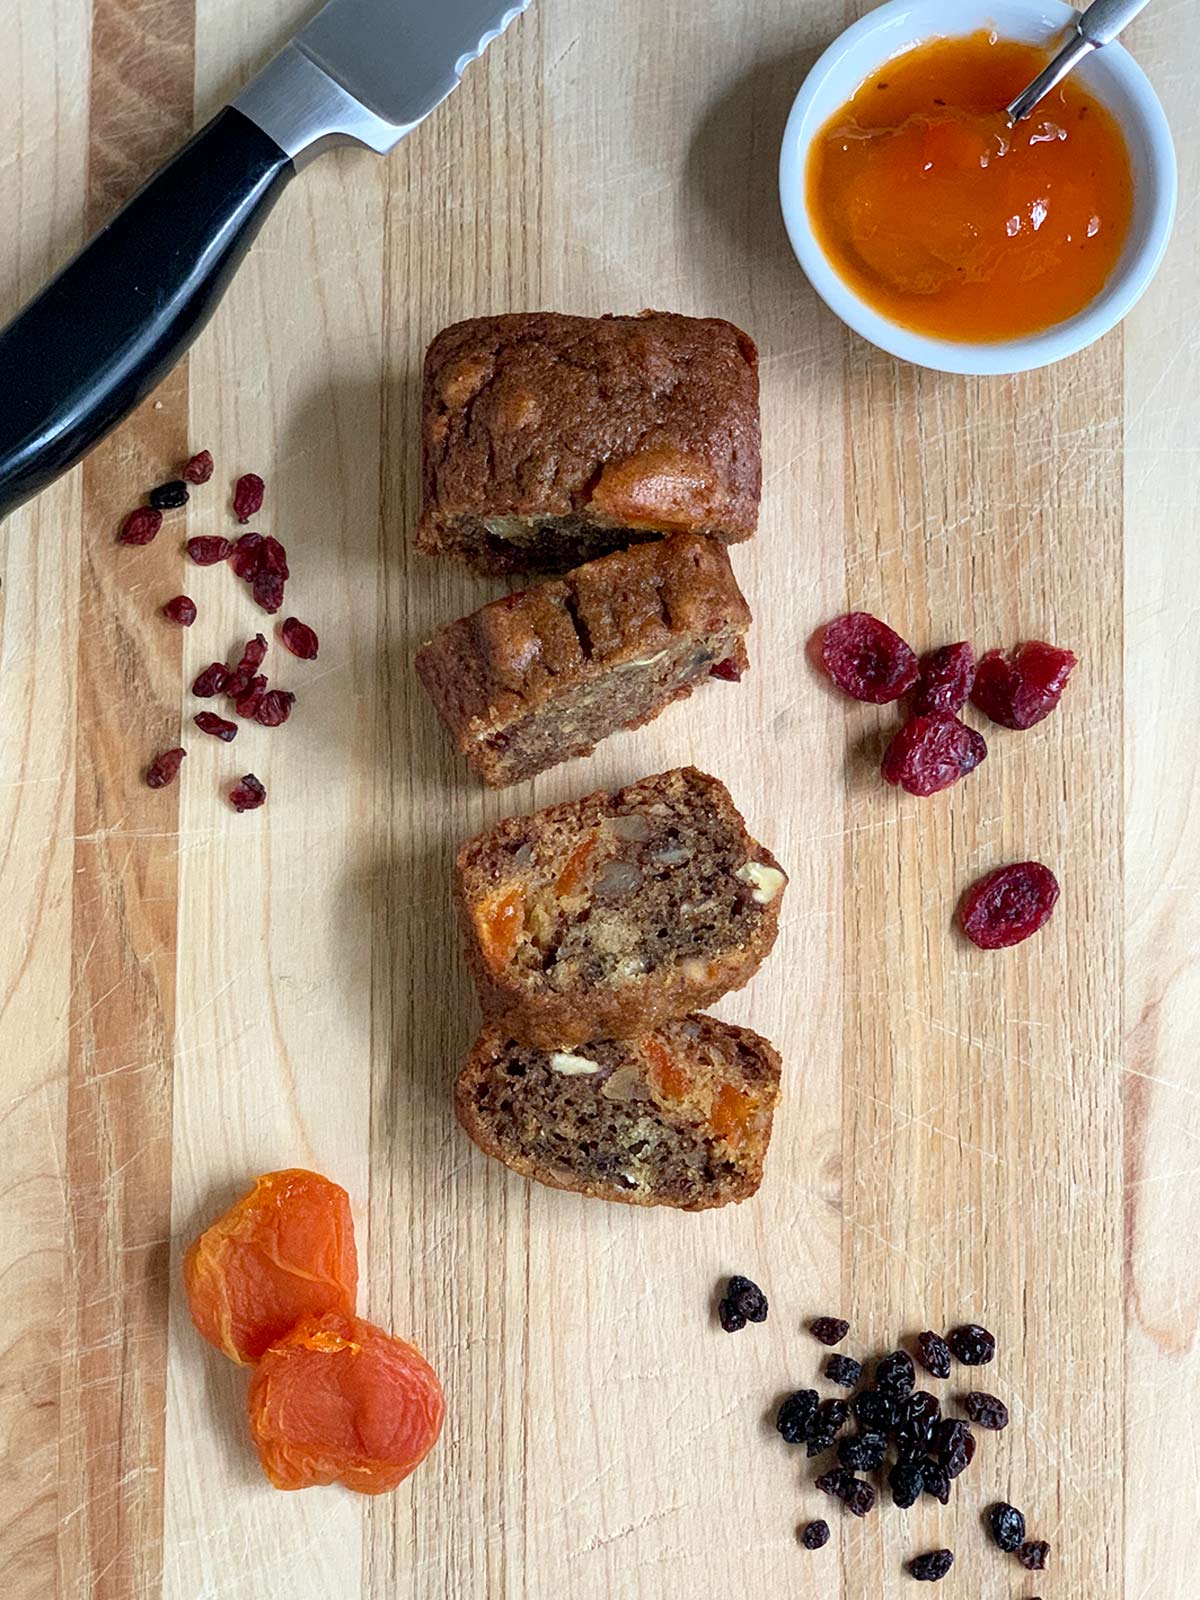 Mini persimmon loaf sliced on cutting board along side dried fruit, persimmon pulp, and a knife.